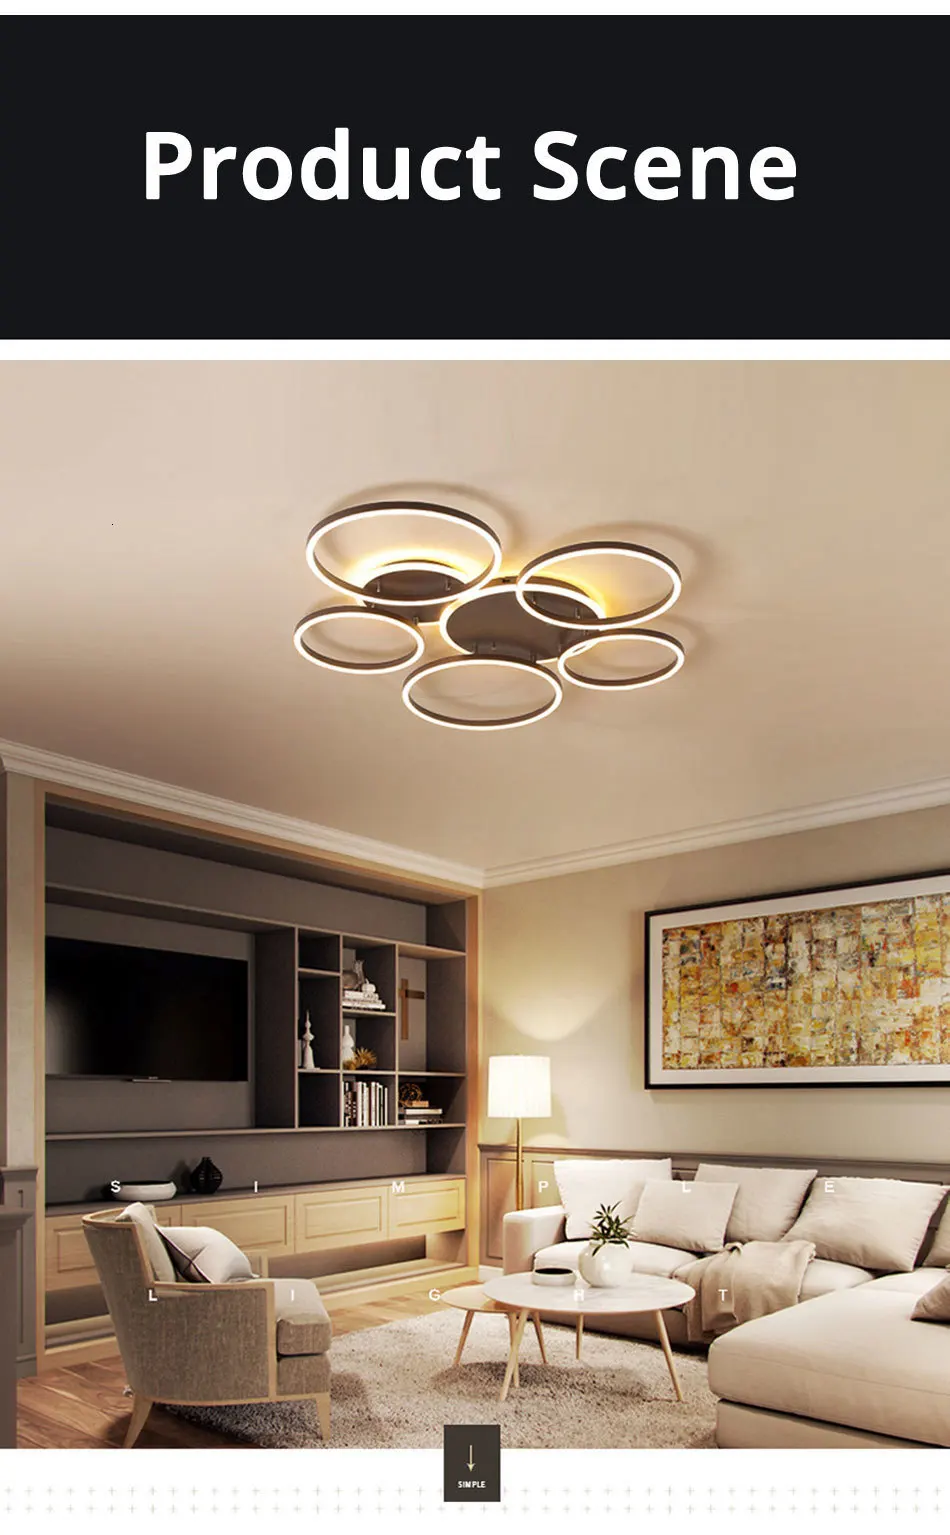 Surface Mounted Led Chandelier White&Coffee Body Modern Led Chandelier Lighting Living room Bedroom Kitchen Dining room L